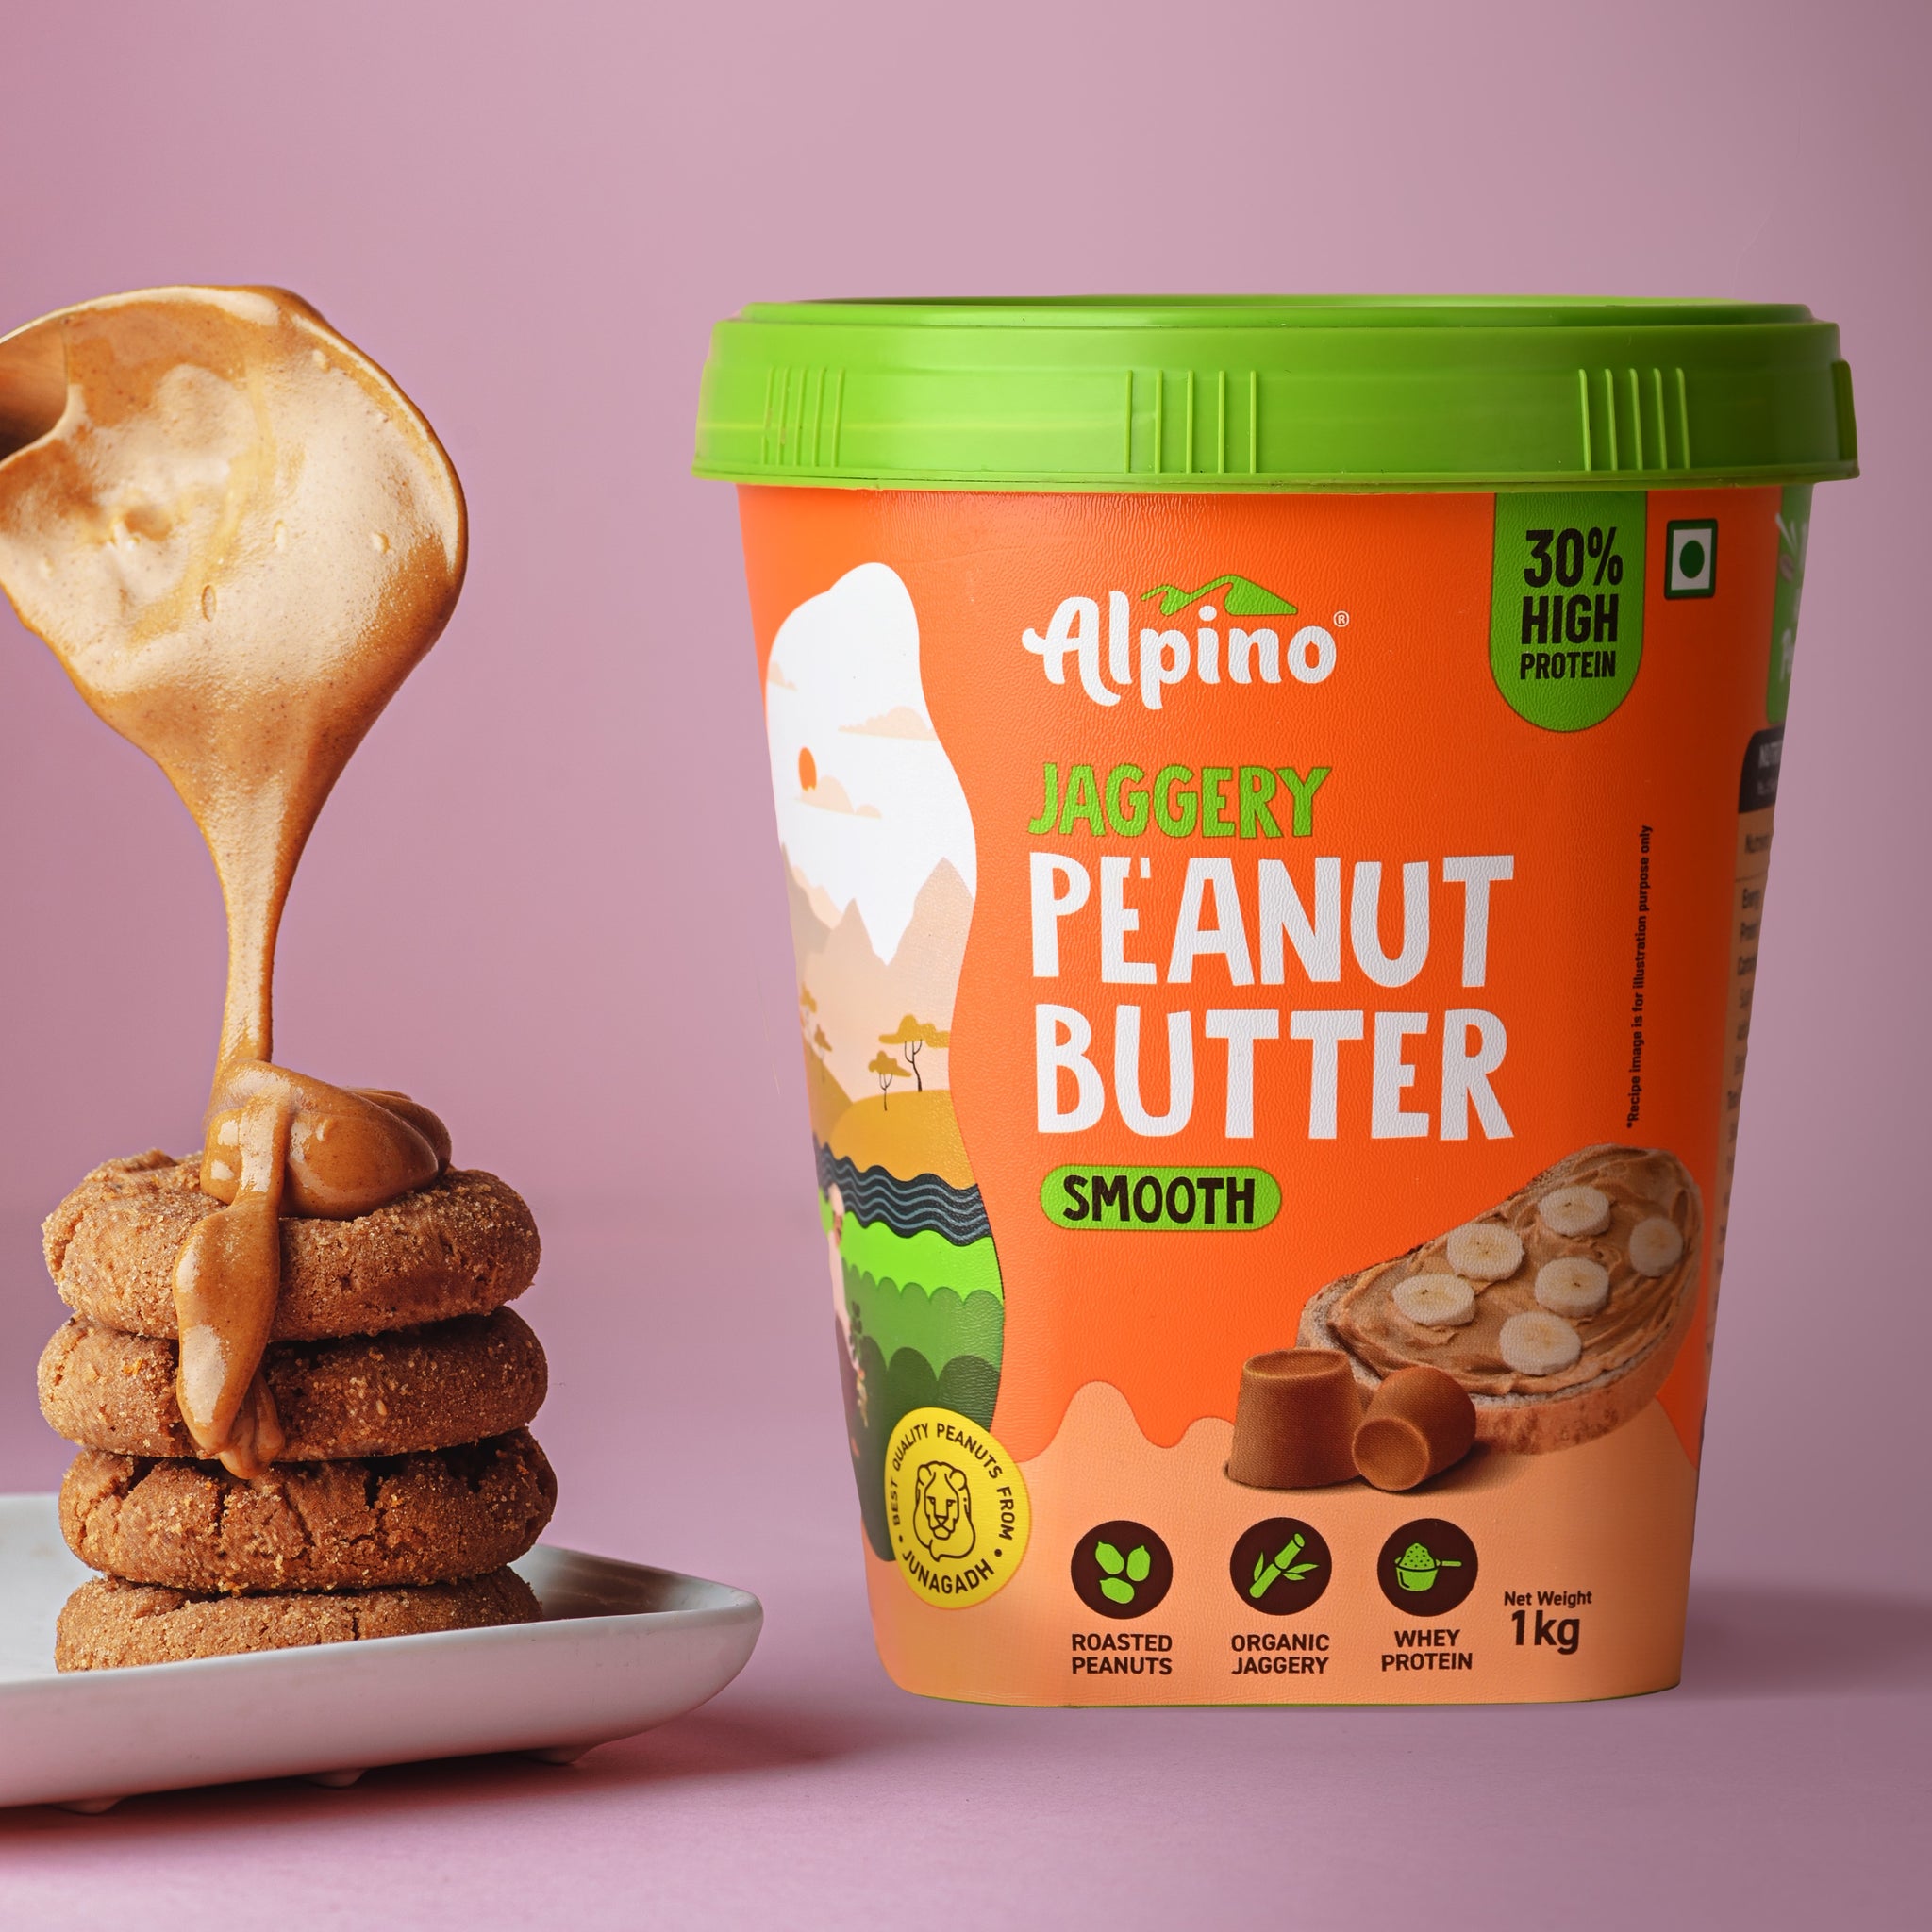 Alpino High Protein Jaggery Peanut Butter: A review of taste, texture and quality